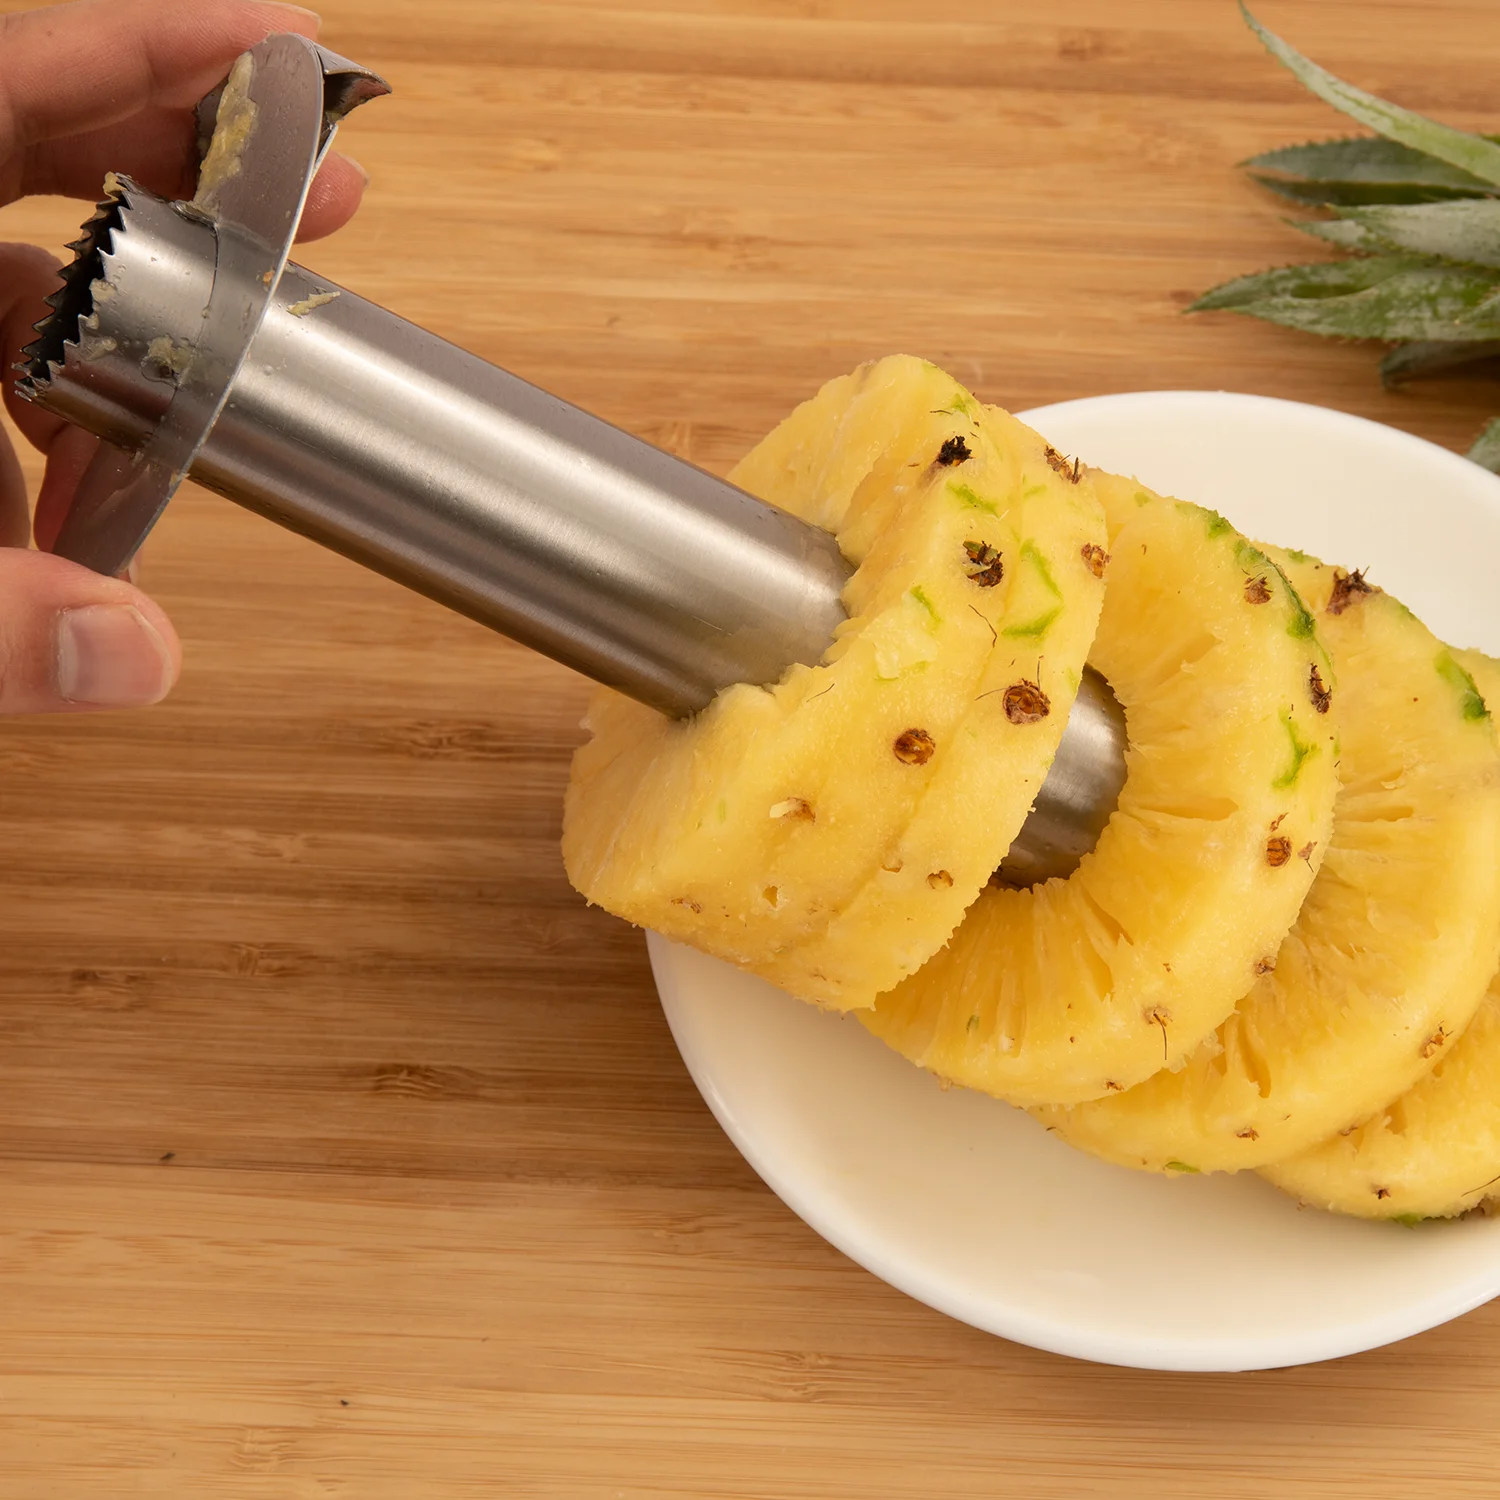 High Quality Kitchen Gadgets Stainless Steel Pineapple Peeler Pineapple Corer And Slicer Cutter